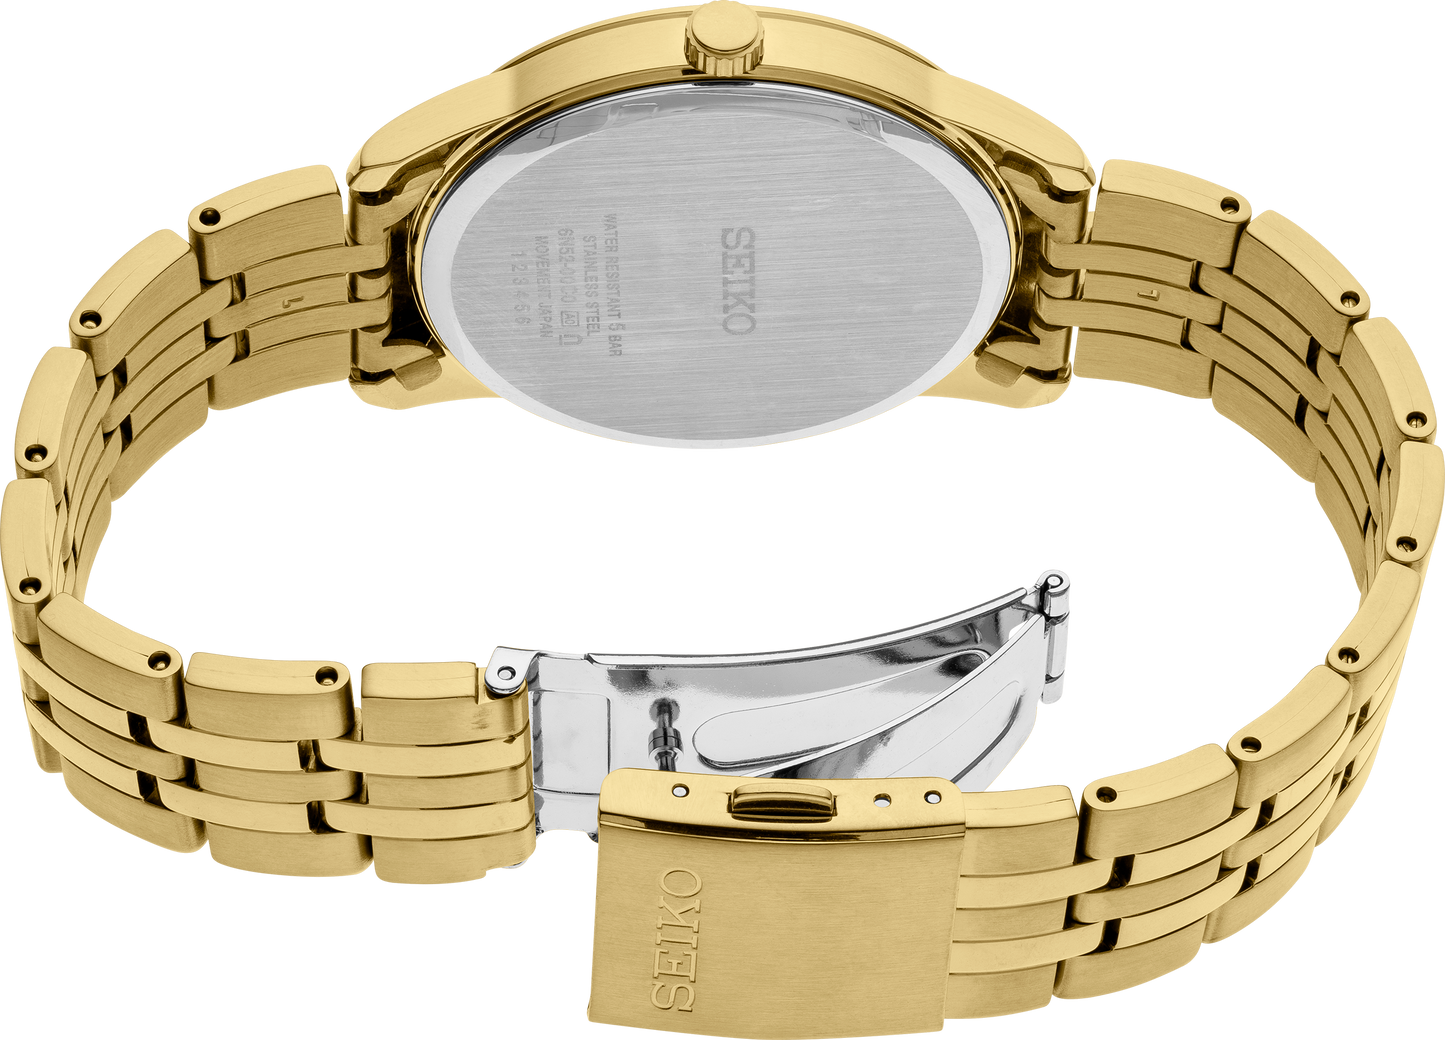 Seiko Men's Essential Gold Tone Stainless Steel Link Watch SUR442